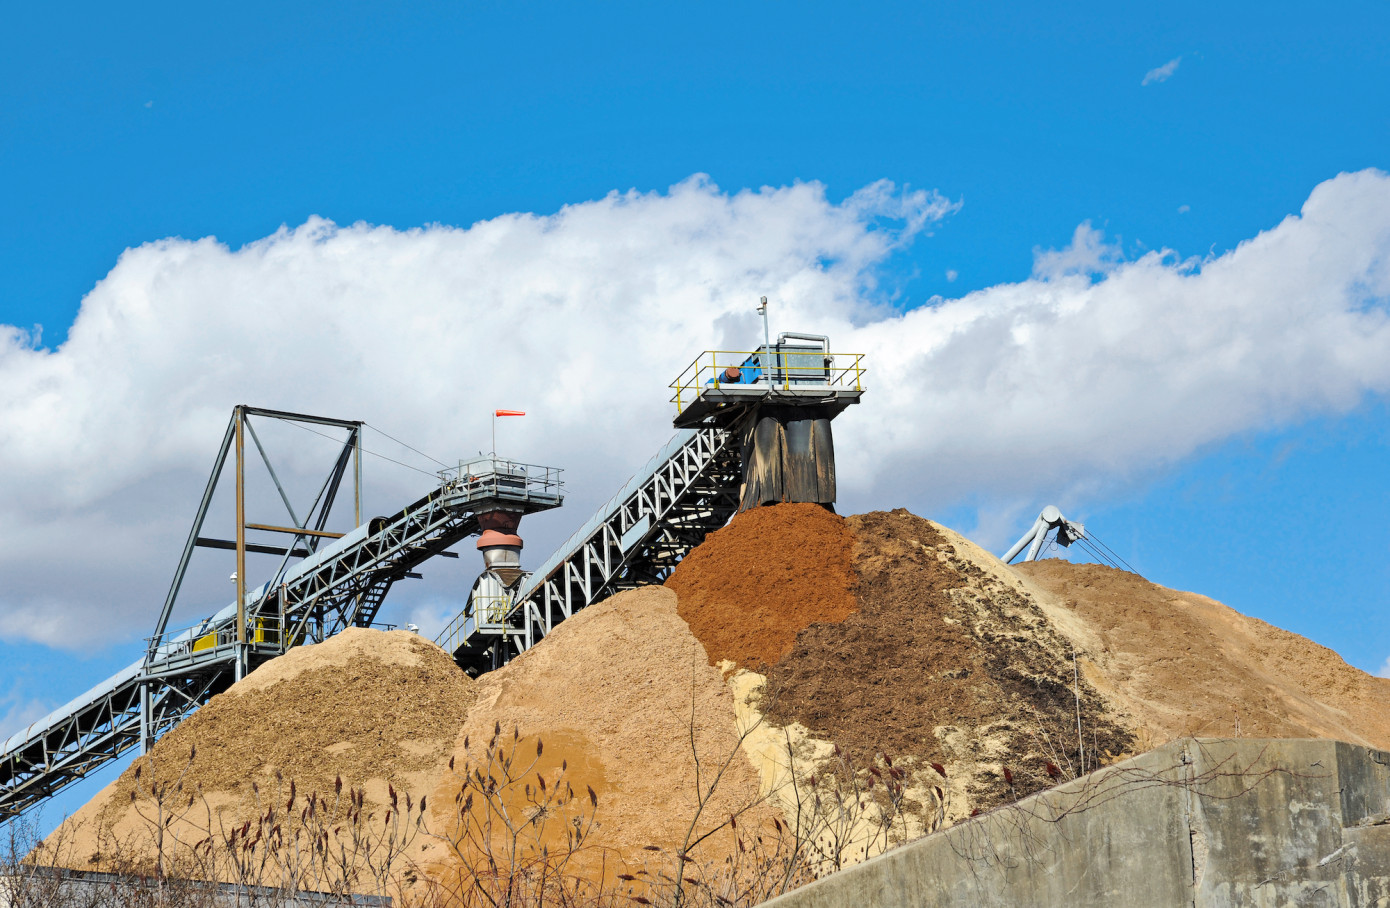 In February, price for wood chips exported from Australia to China gains 3%